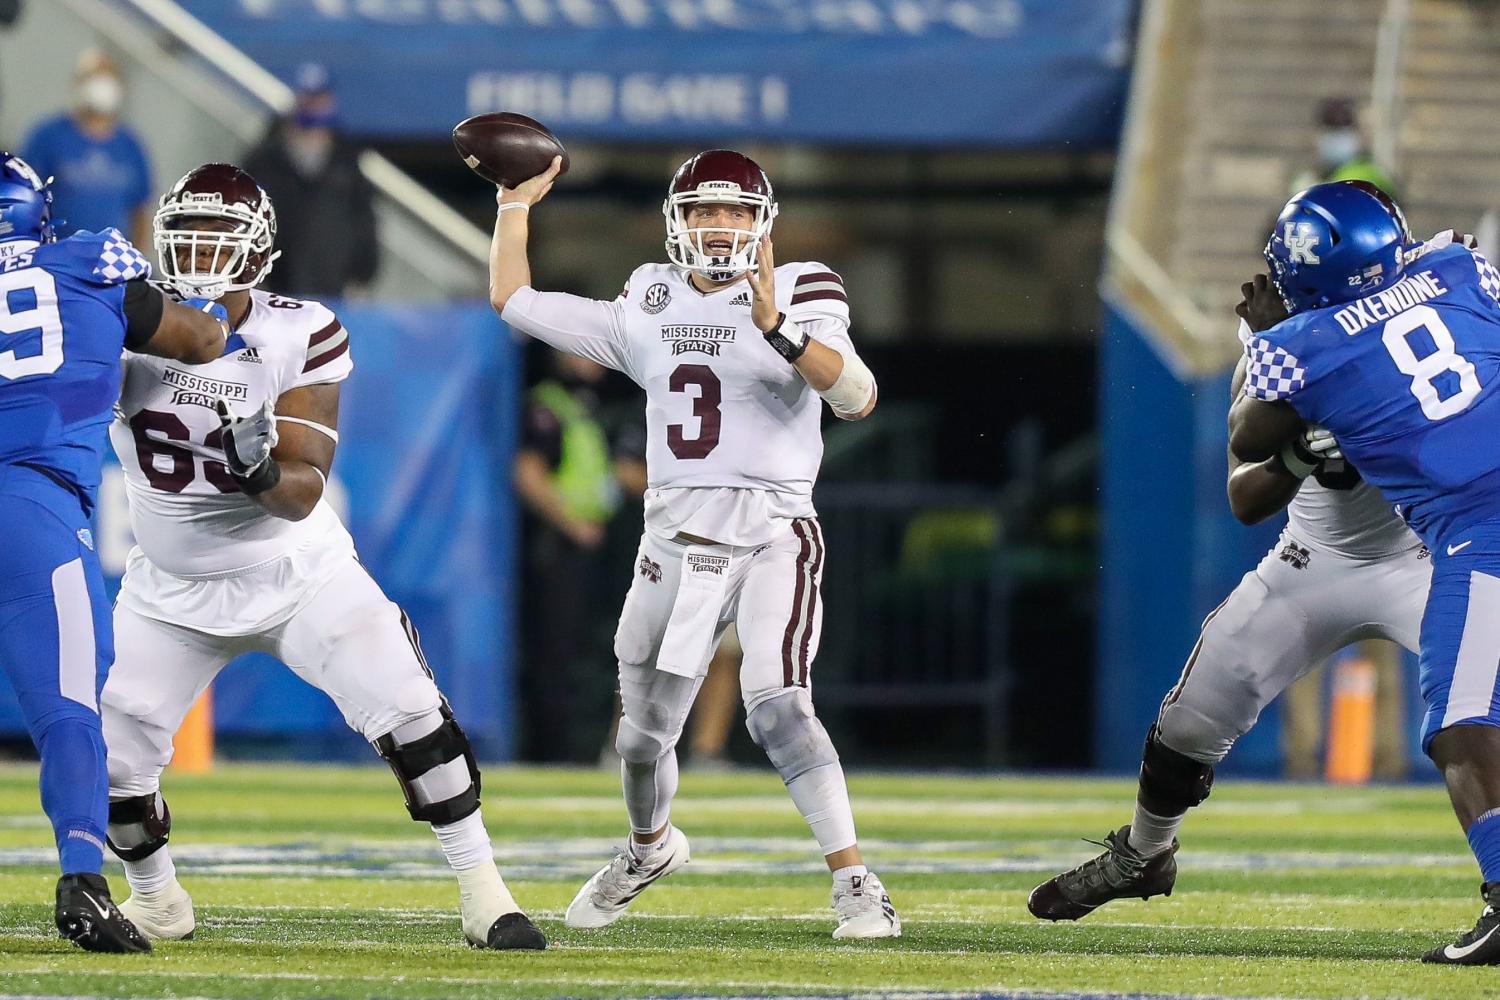 Oct 10, 2020; Lexington, Kentucky, USA; Mississippi State Bulldogs quarterback K.J. Costello (3) throws a pass against the Kentucky Wildcats in the second half at Kroger Field. Mandatory Credit: Katie Stratman-USA TODAY Sports